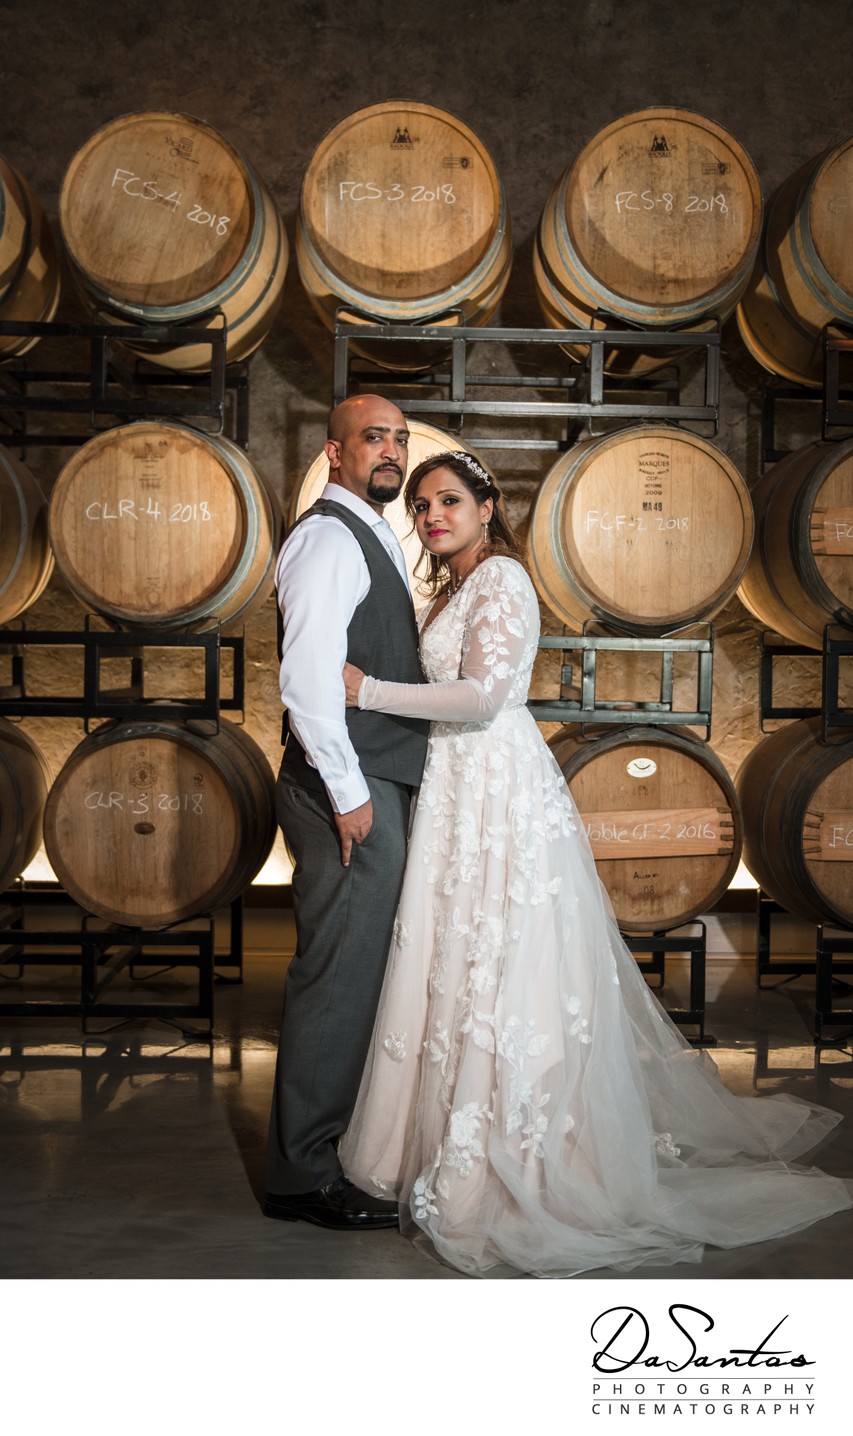 Newly weds at a winery